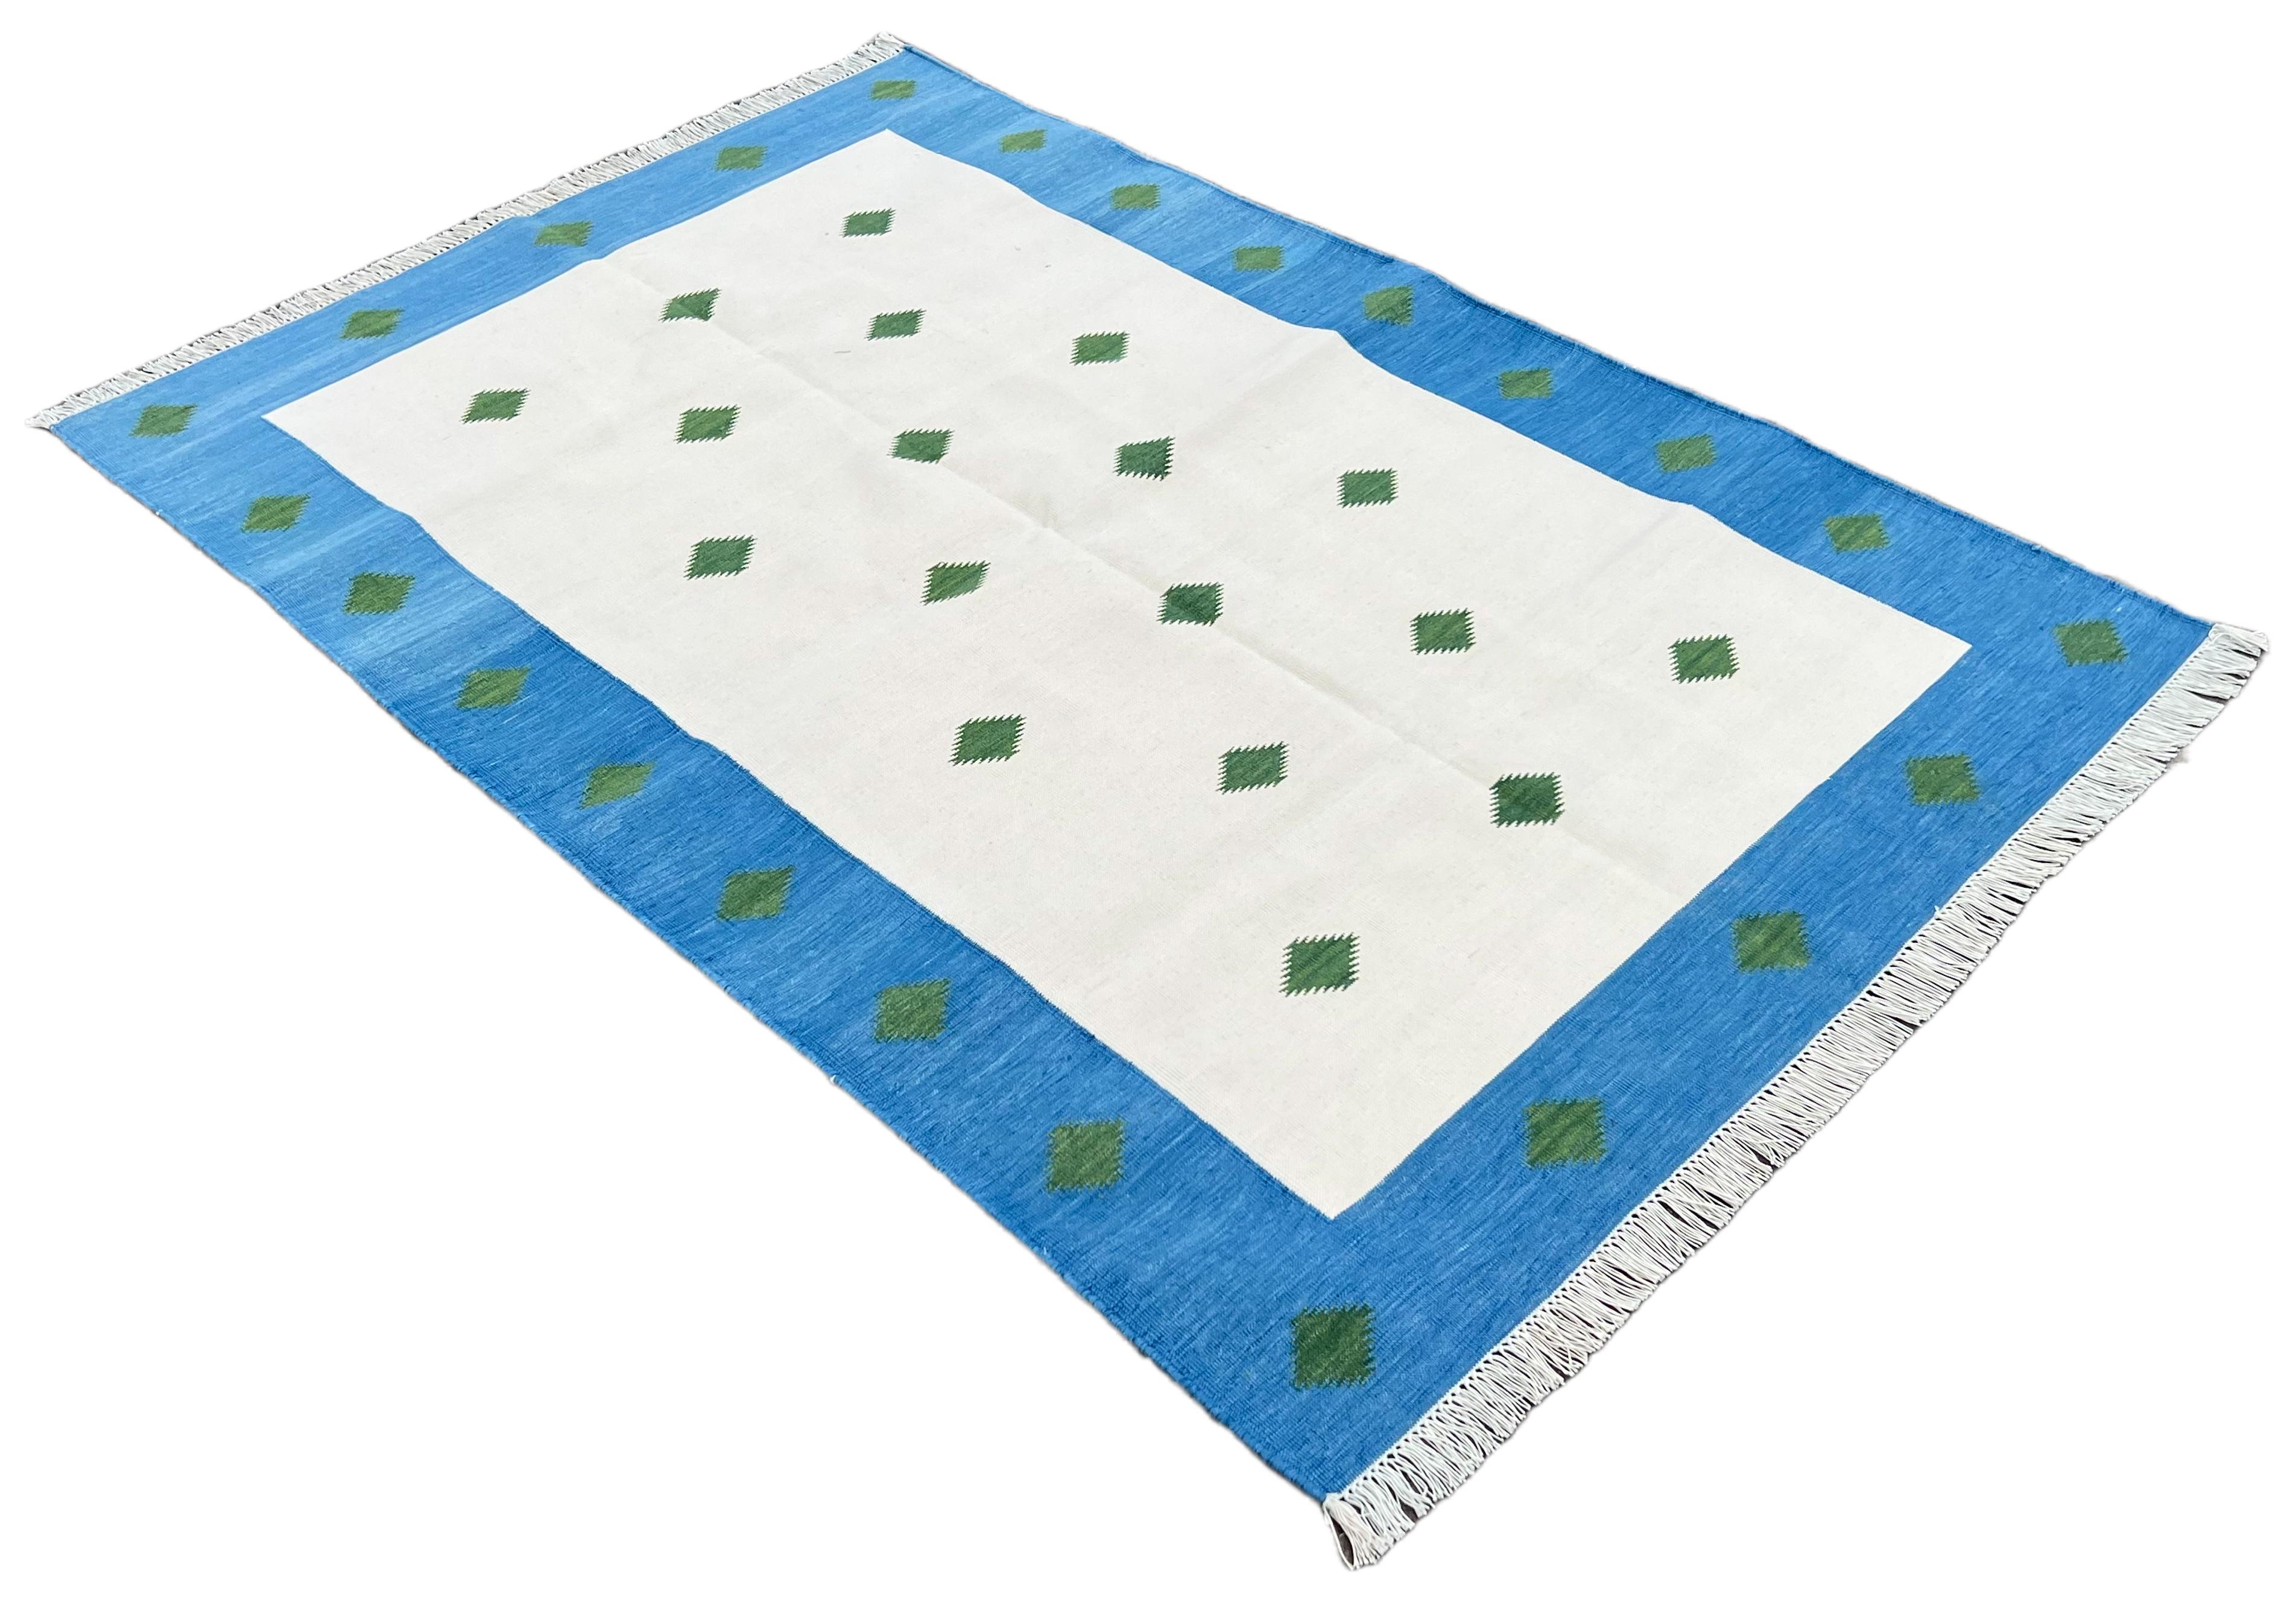 Handmade Cotton Natural Vegetable Dyed Rug, Cream, Green And Blue Diamond Indian Dhurrie- 4'x6'
These special flat-weave dhurries are hand-woven with 15 ply 100% cotton yarn. Due to the special manufacturing techniques used to create our rugs, the